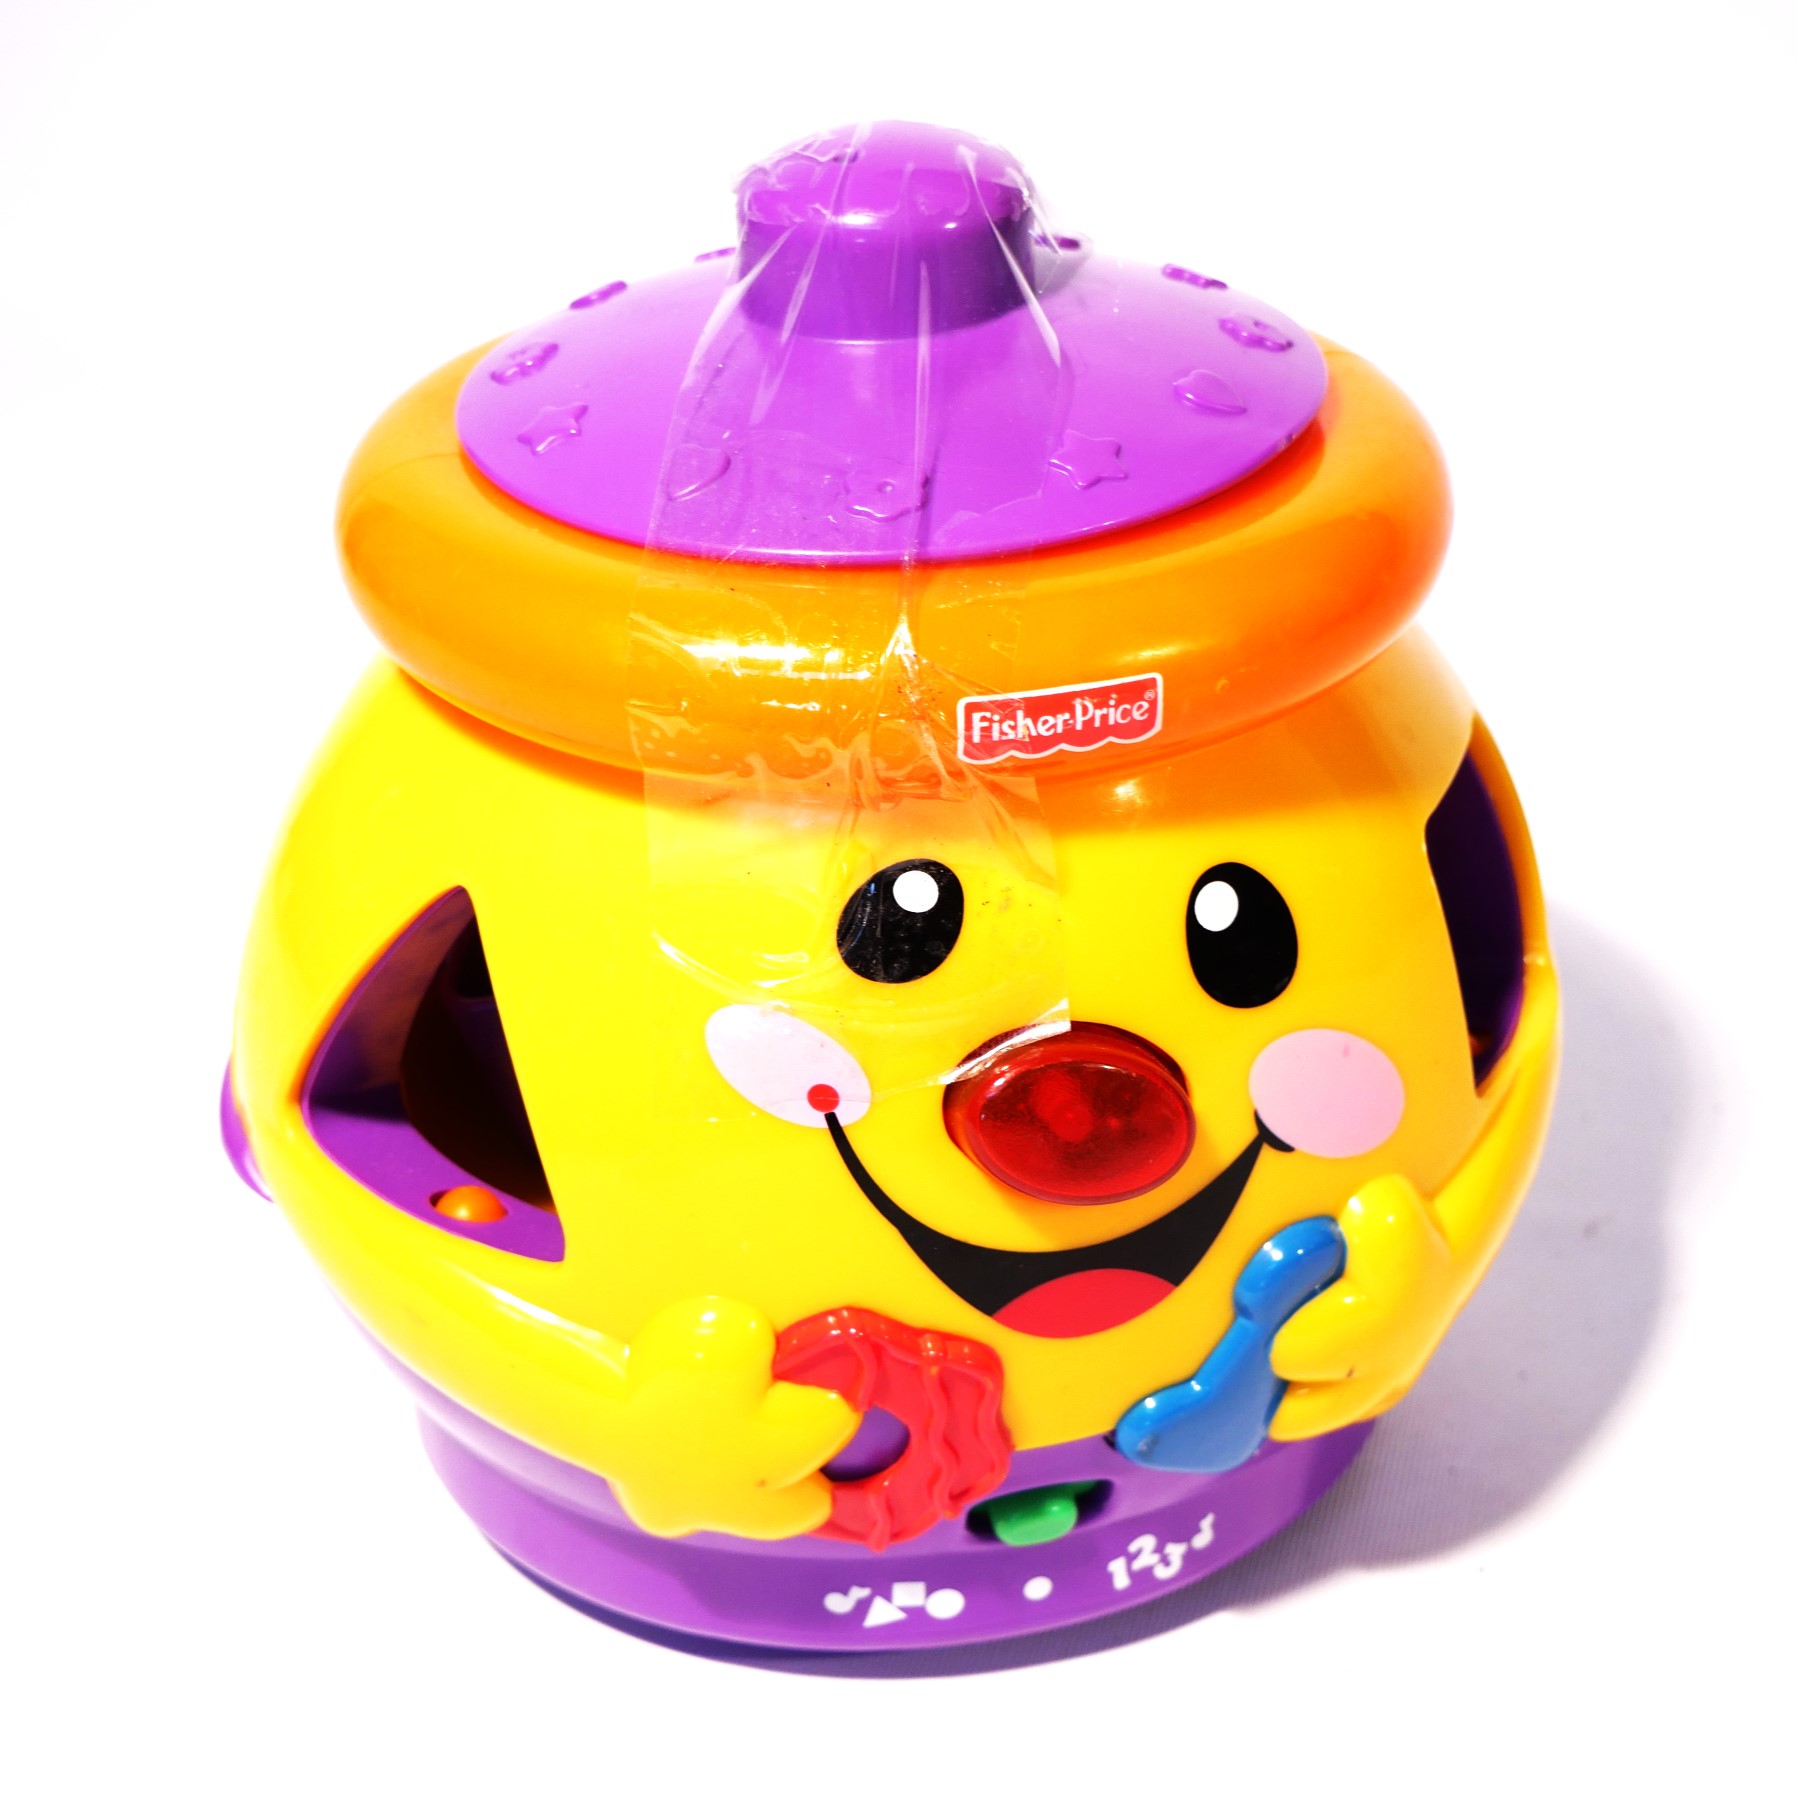 Biscuit surprise Fisher-price